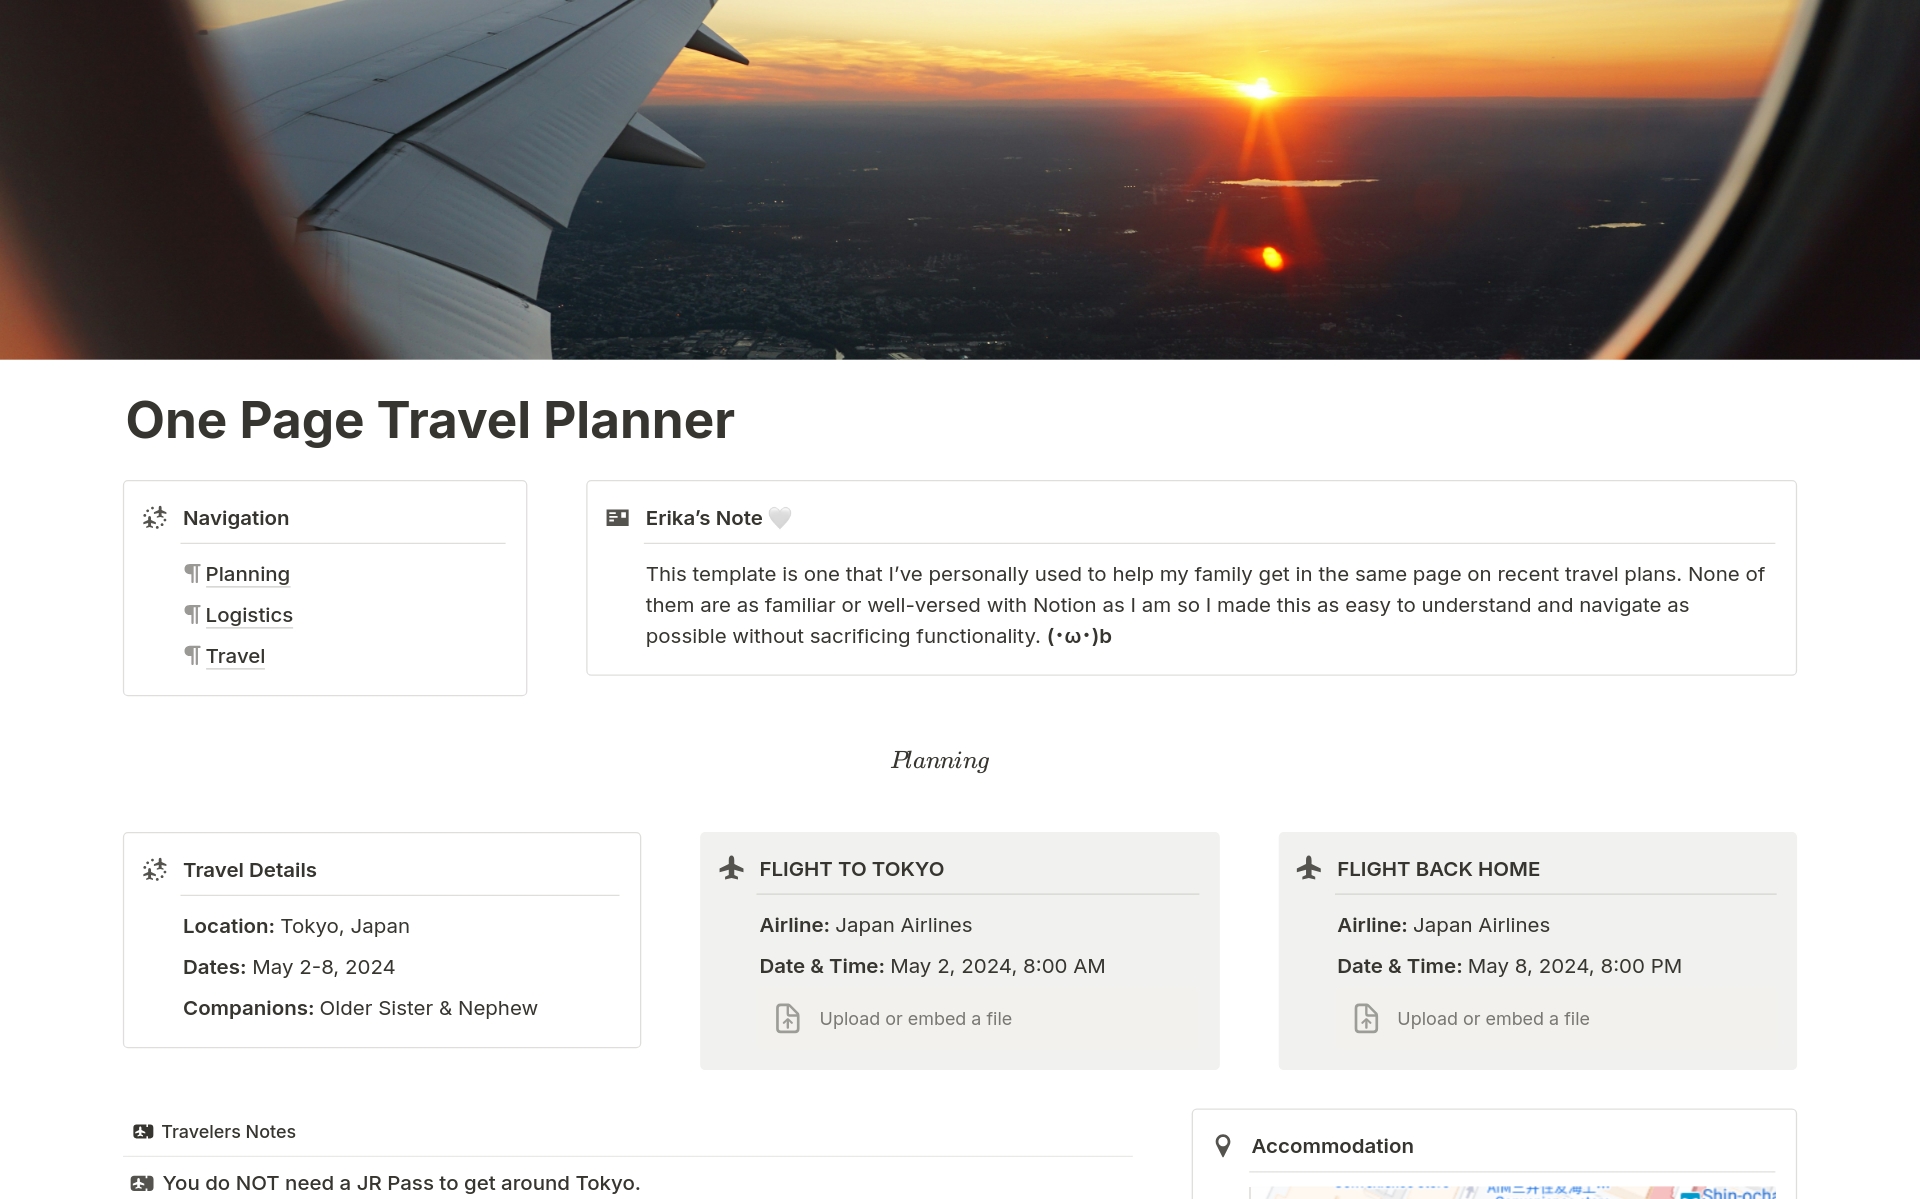 Streamline your adventures and plan smarter with this one-page travel planner, your ticket to organized and unforgettable journeys!